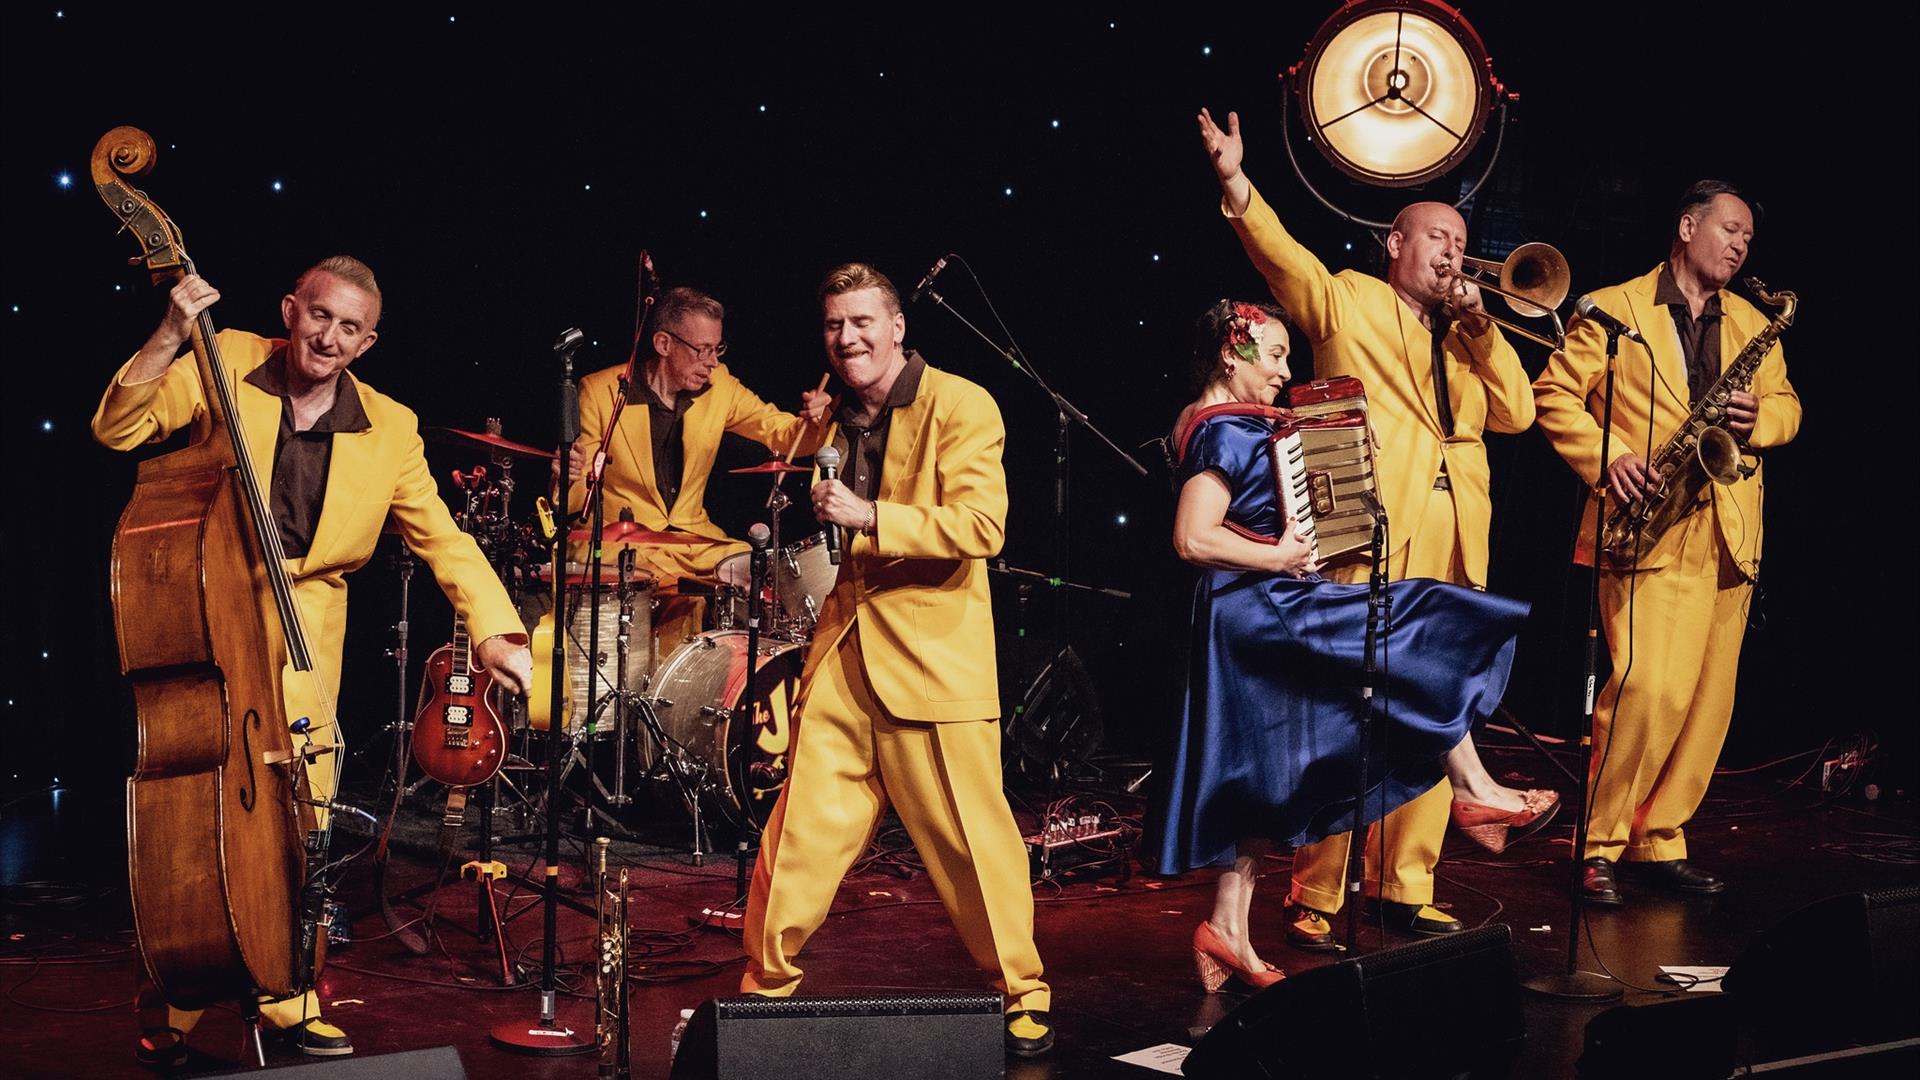 Image shows a band on stage with men in yellow suits and a women in a blue dress